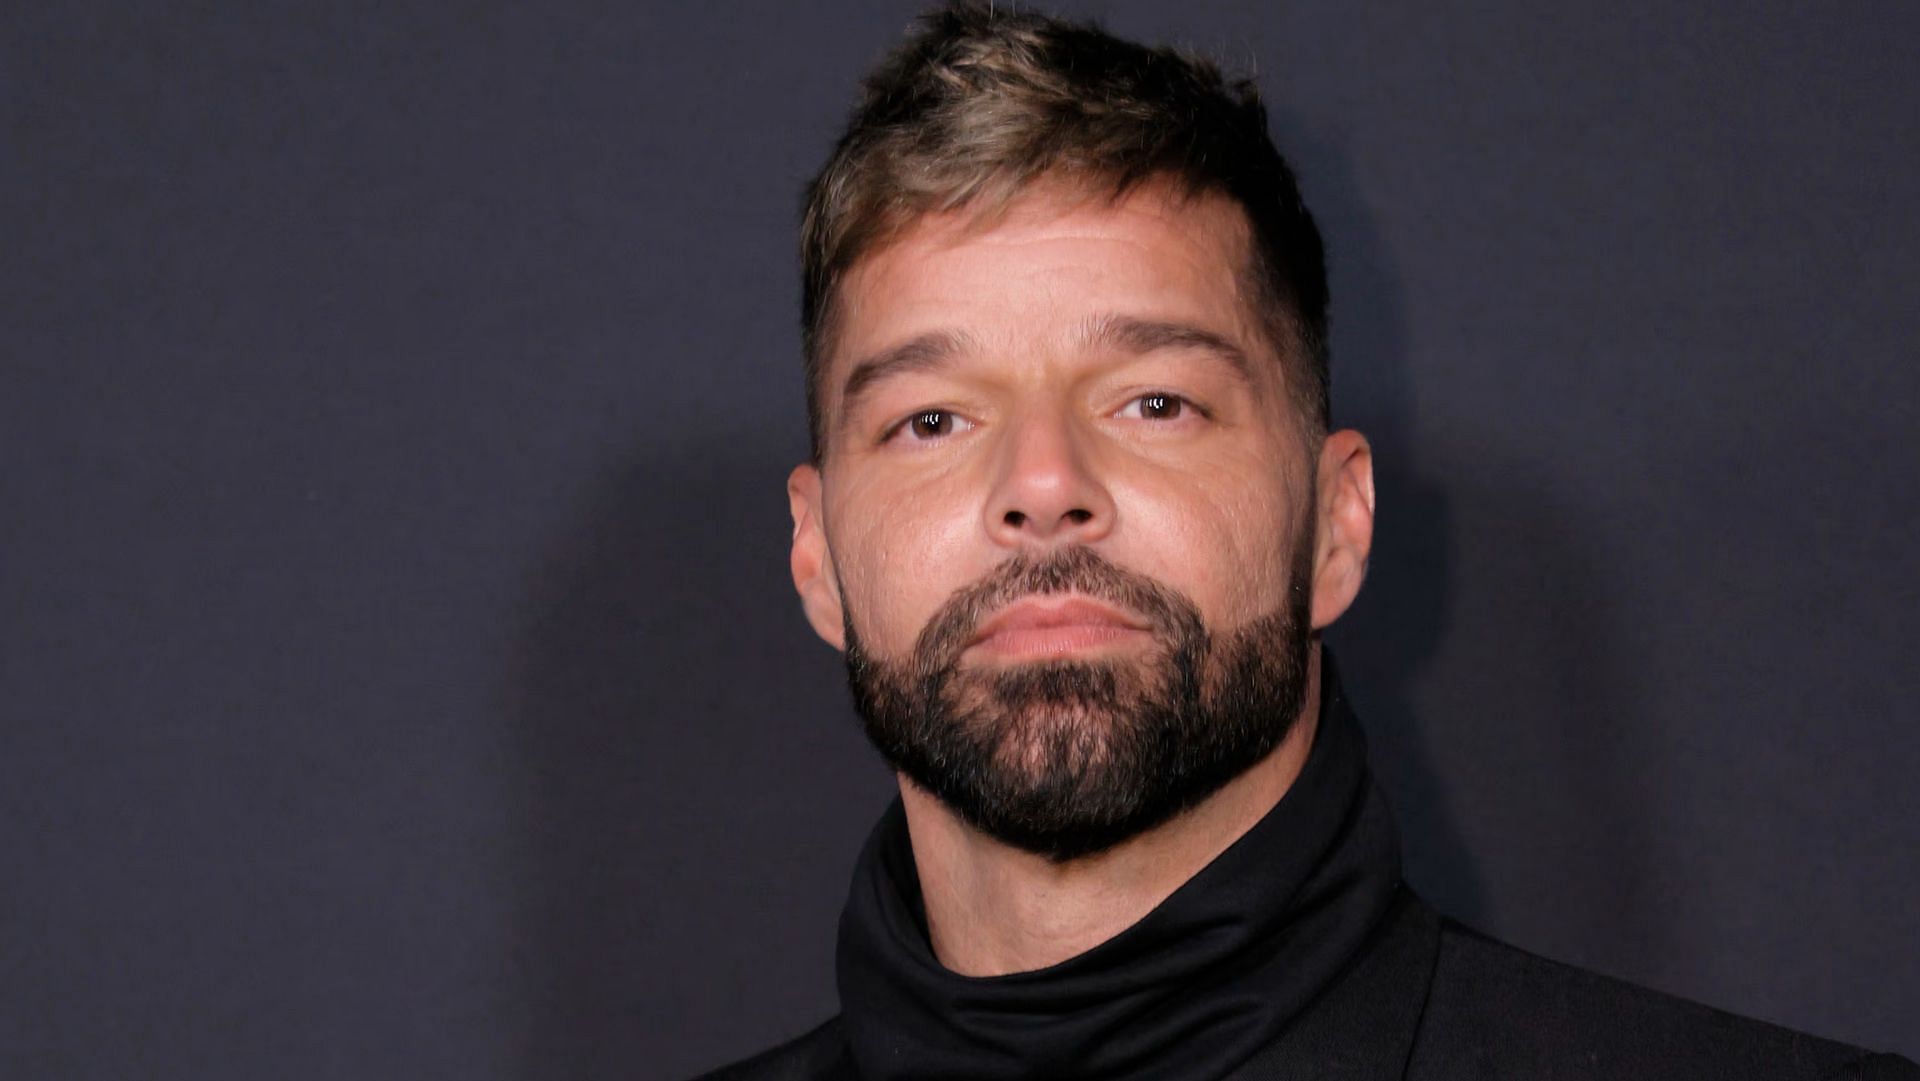 Ricky Martin has several half-siblings from his parents side. (Photo by Michael Loccisano/Getty Images)